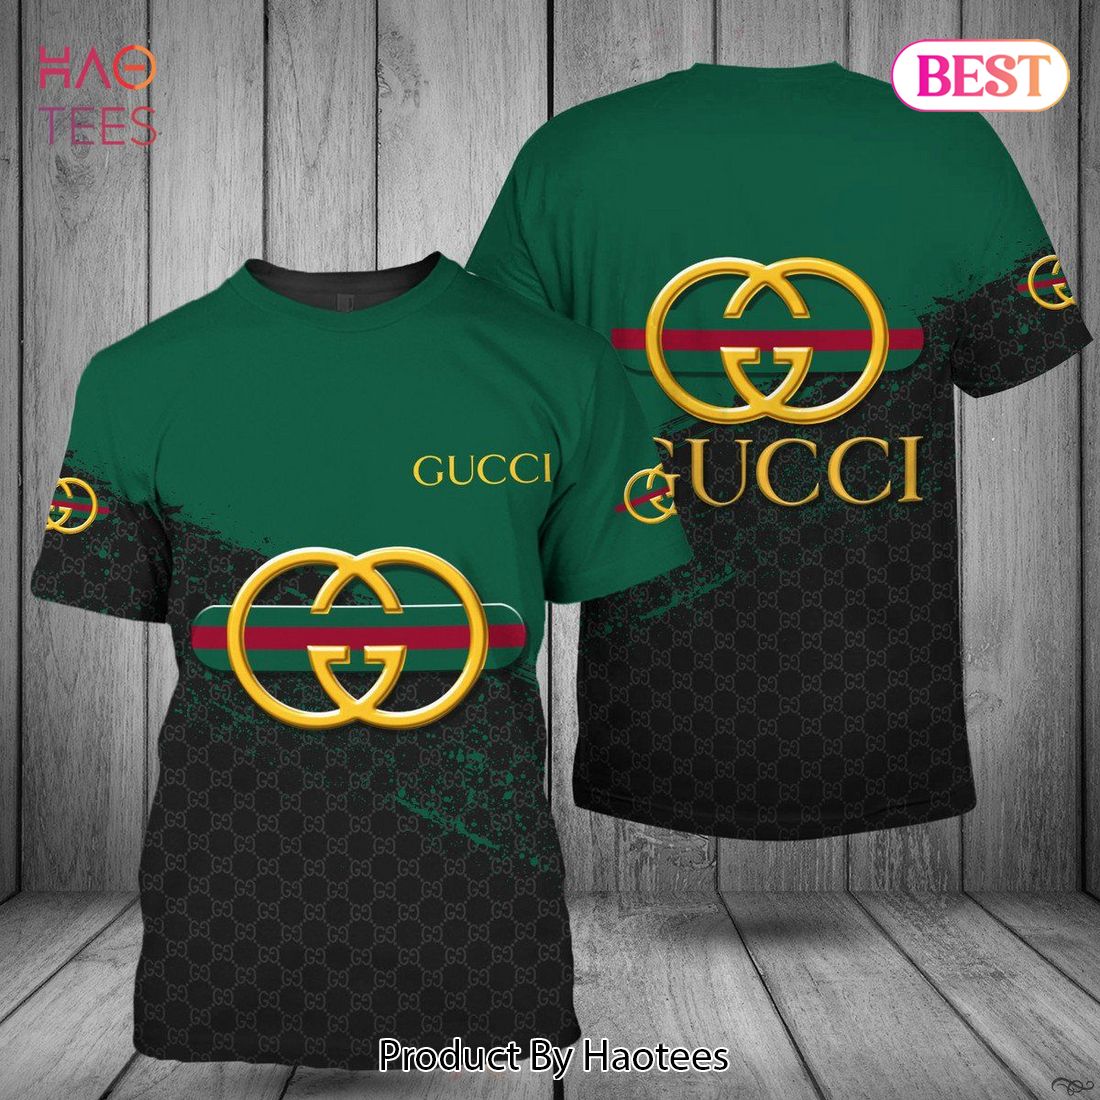 TRENDDING Gucci Luxury Brand  Black Mix Green 3D T-Shirt Limited Edition